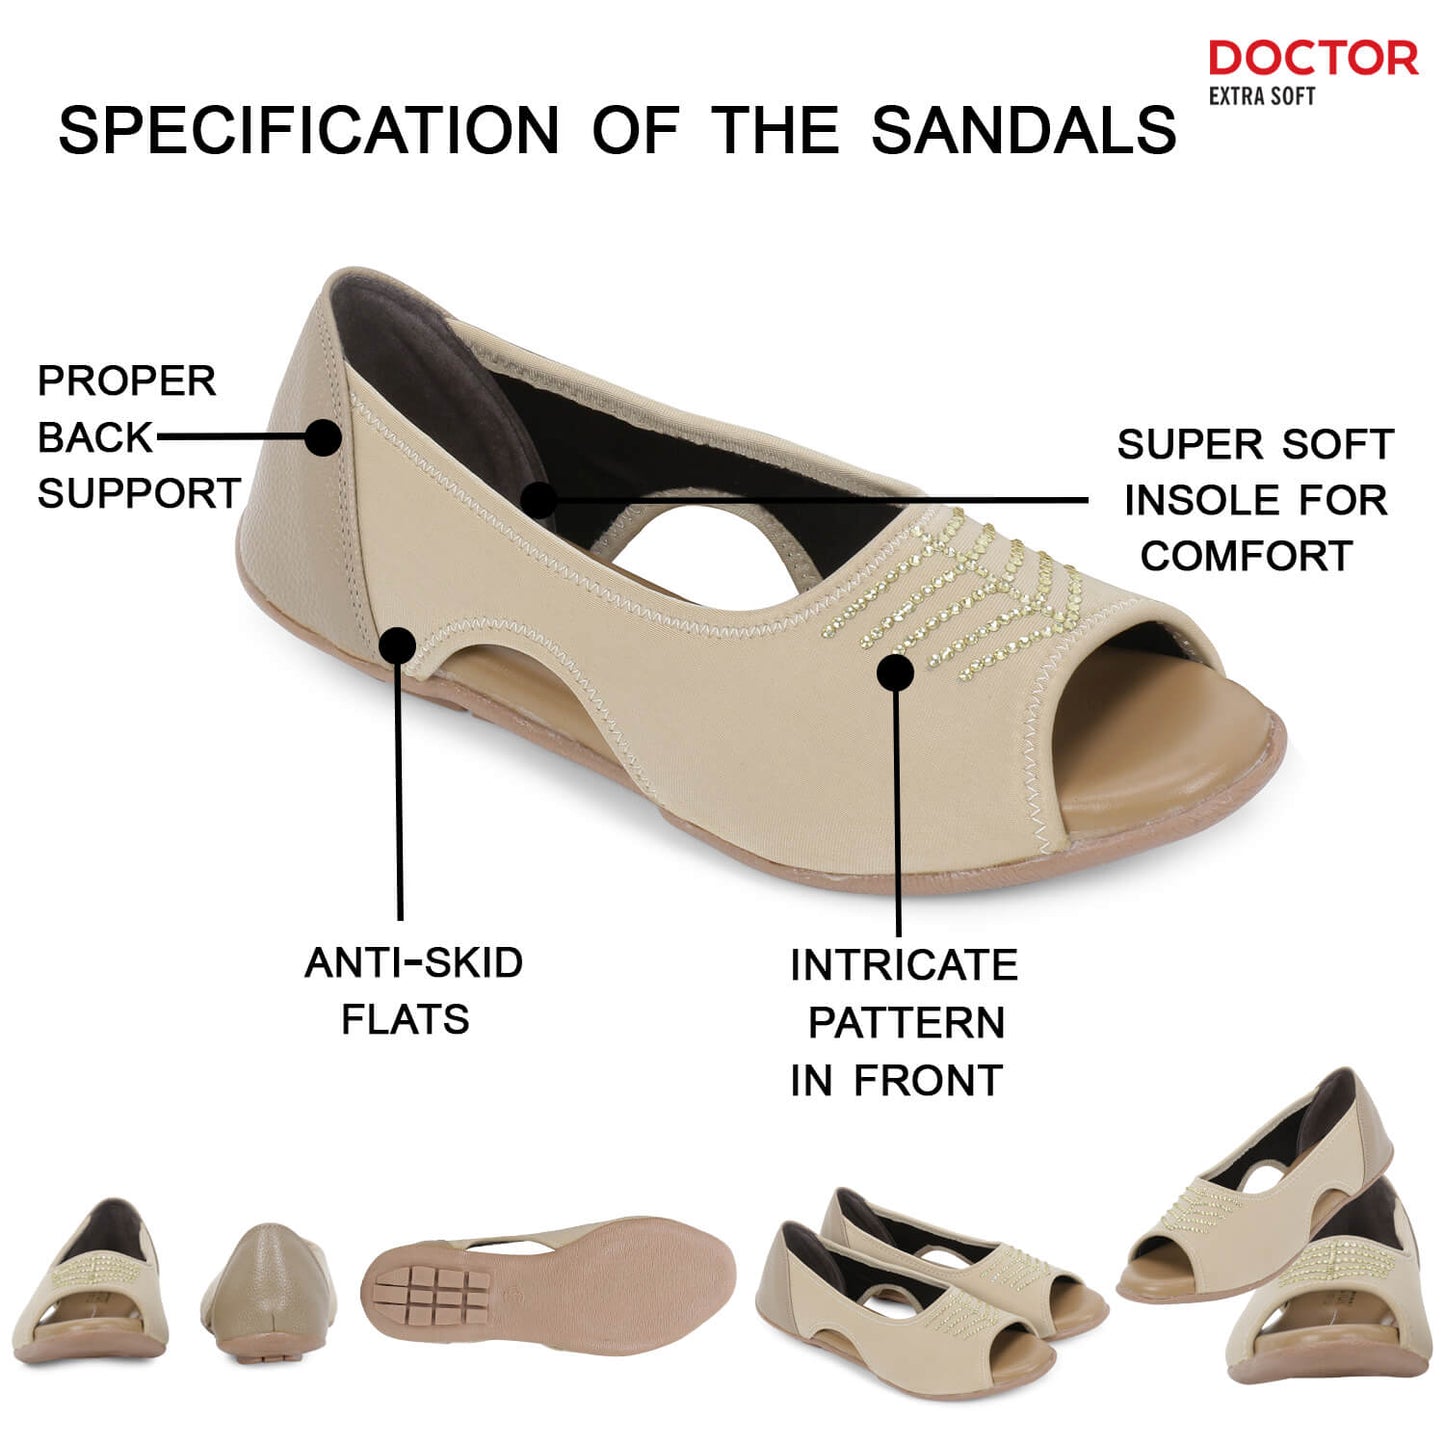 DOCTOR EXTRA SOFT Women's Sandals ART-544, Extra Soft Ortho Care Diabetic & Orthopaedic